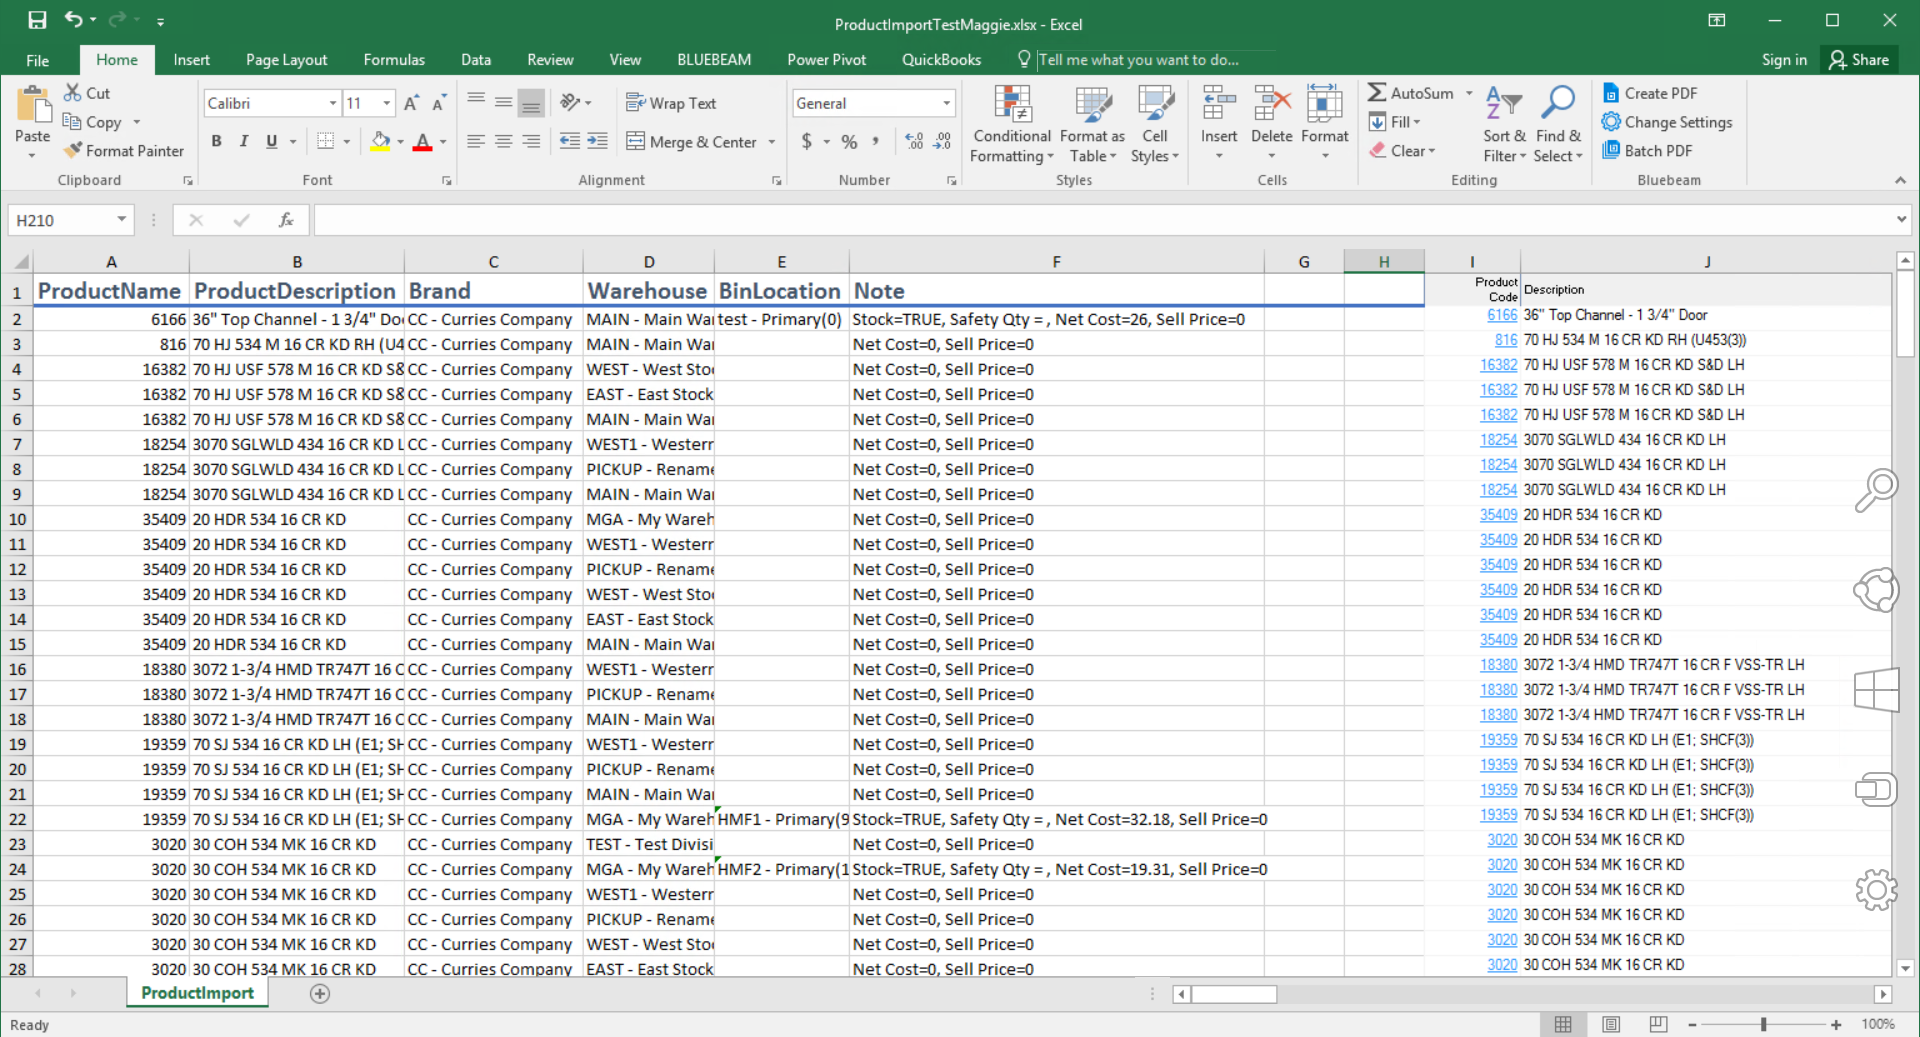 Excel sheet; shows the product data in the template columns.